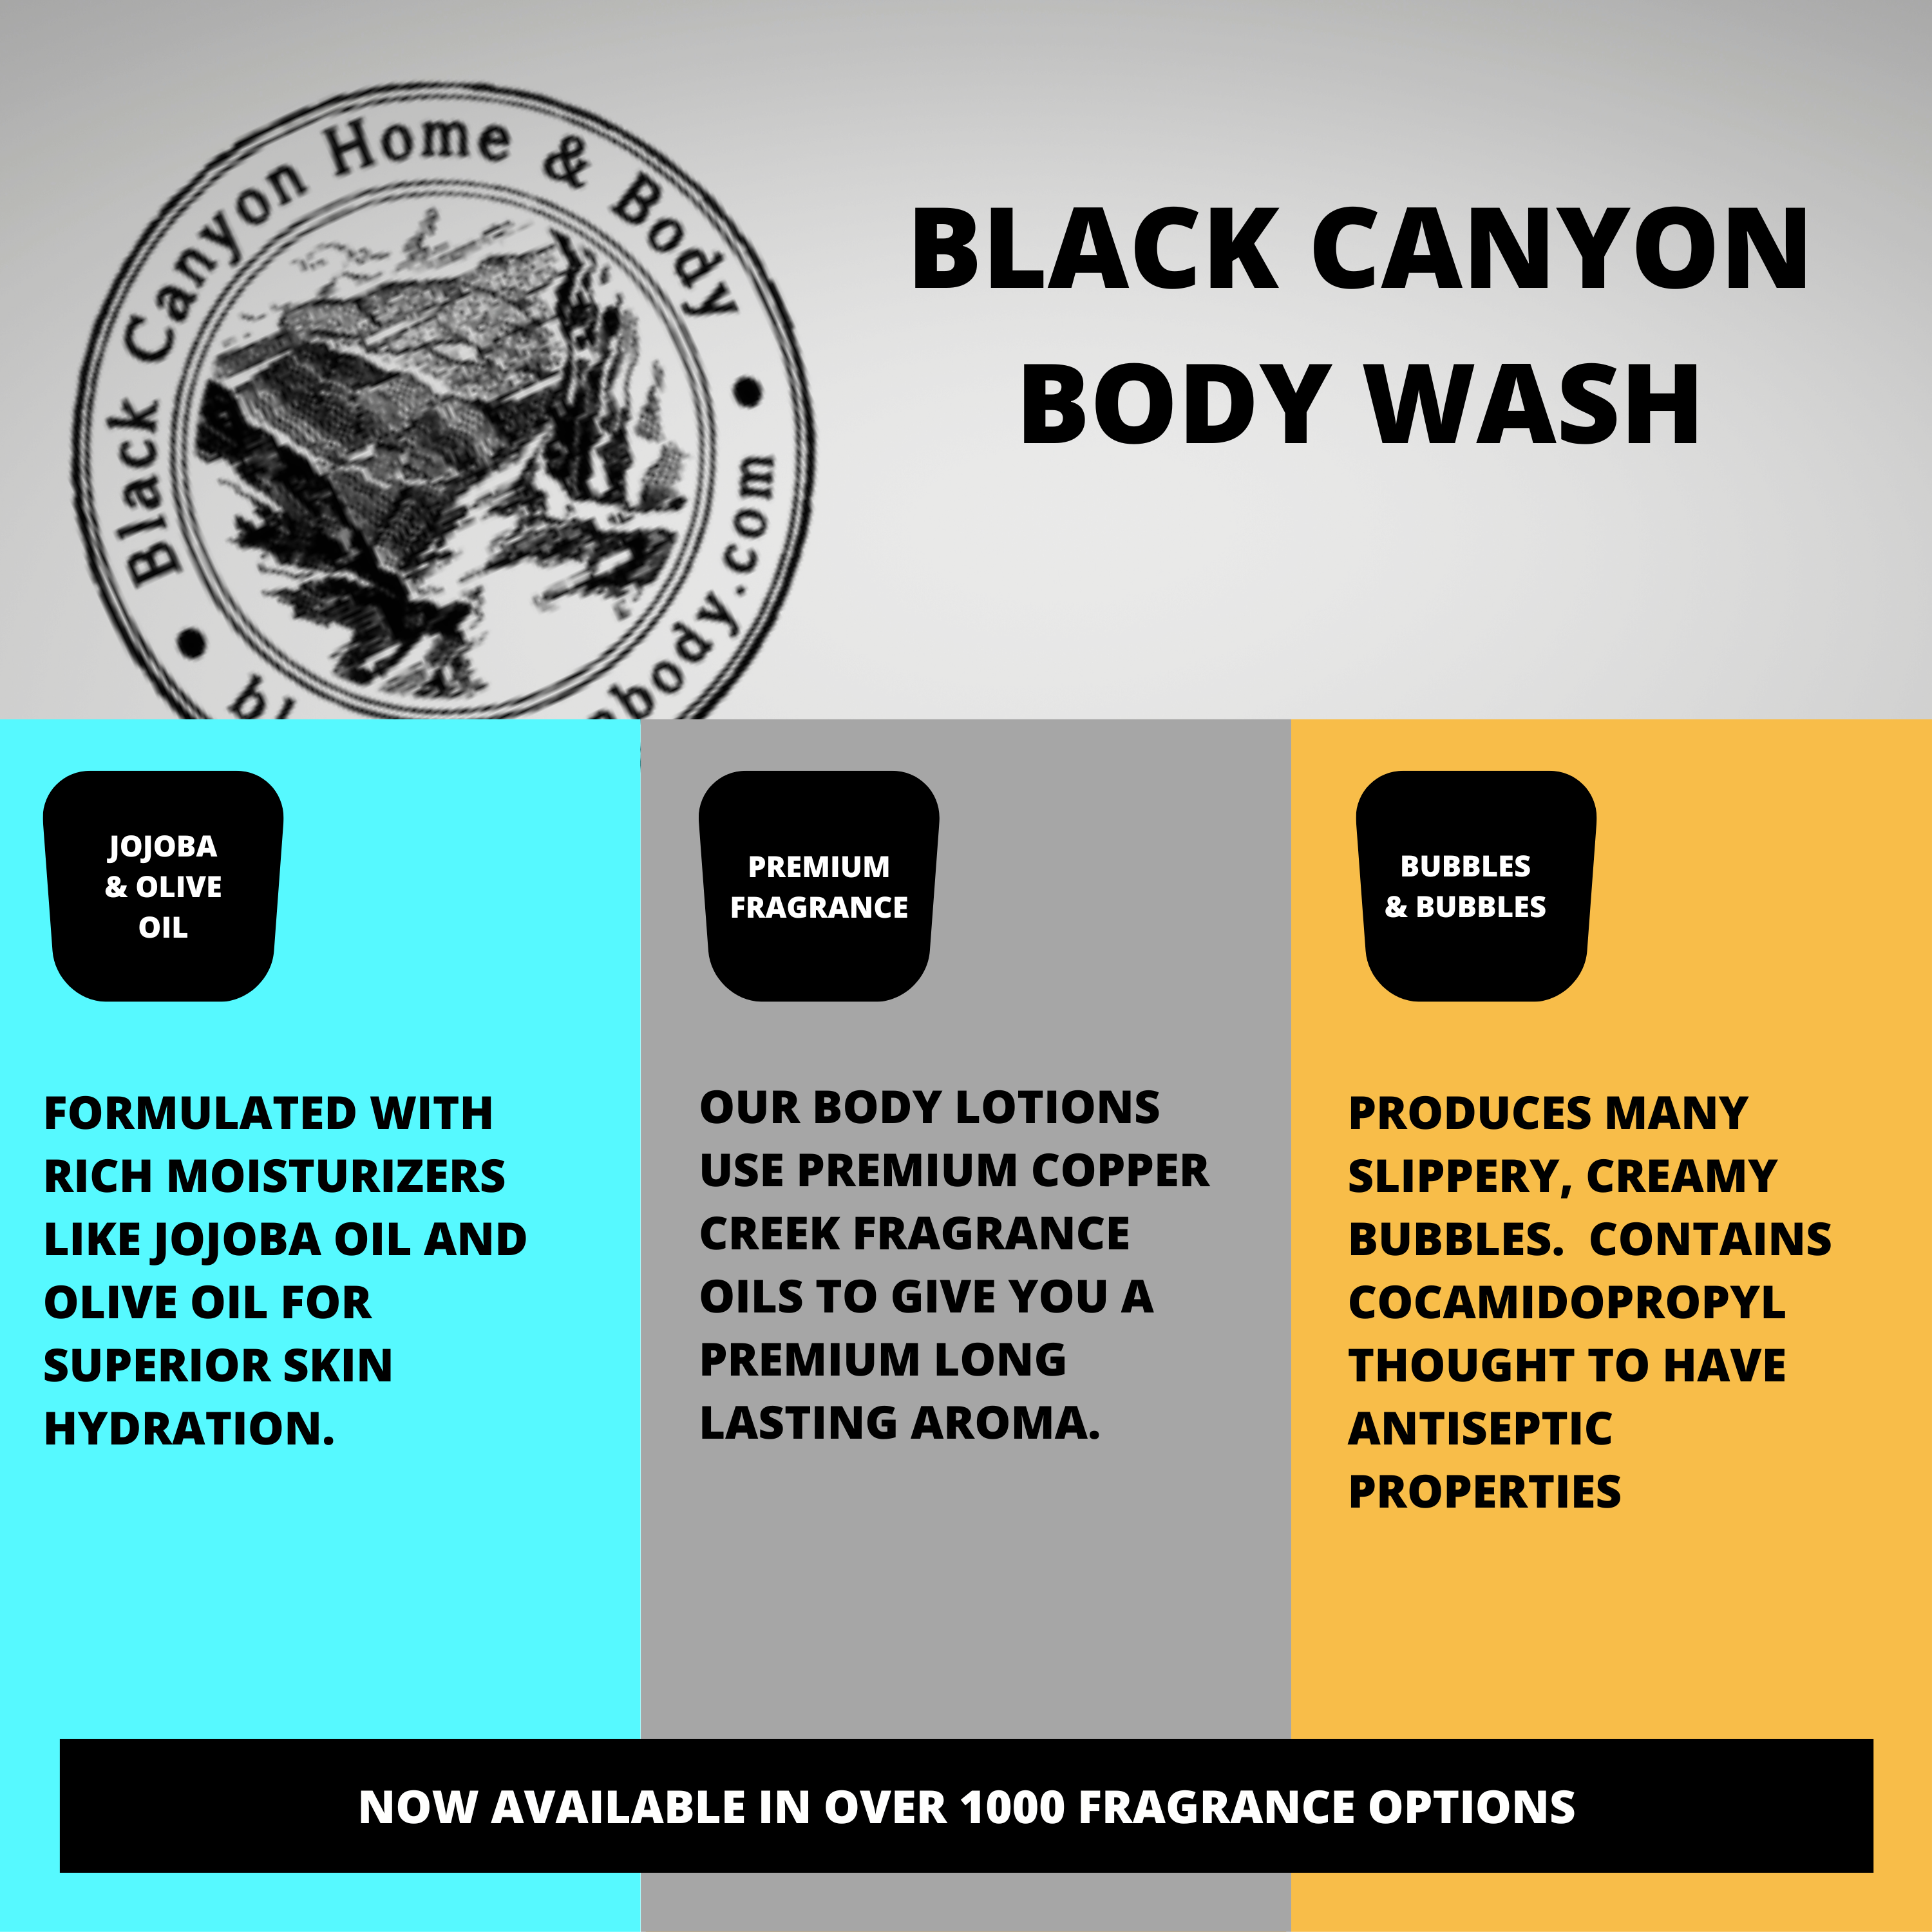 Black Canyon Black Currant & Rose Scented Luxury Body Wash